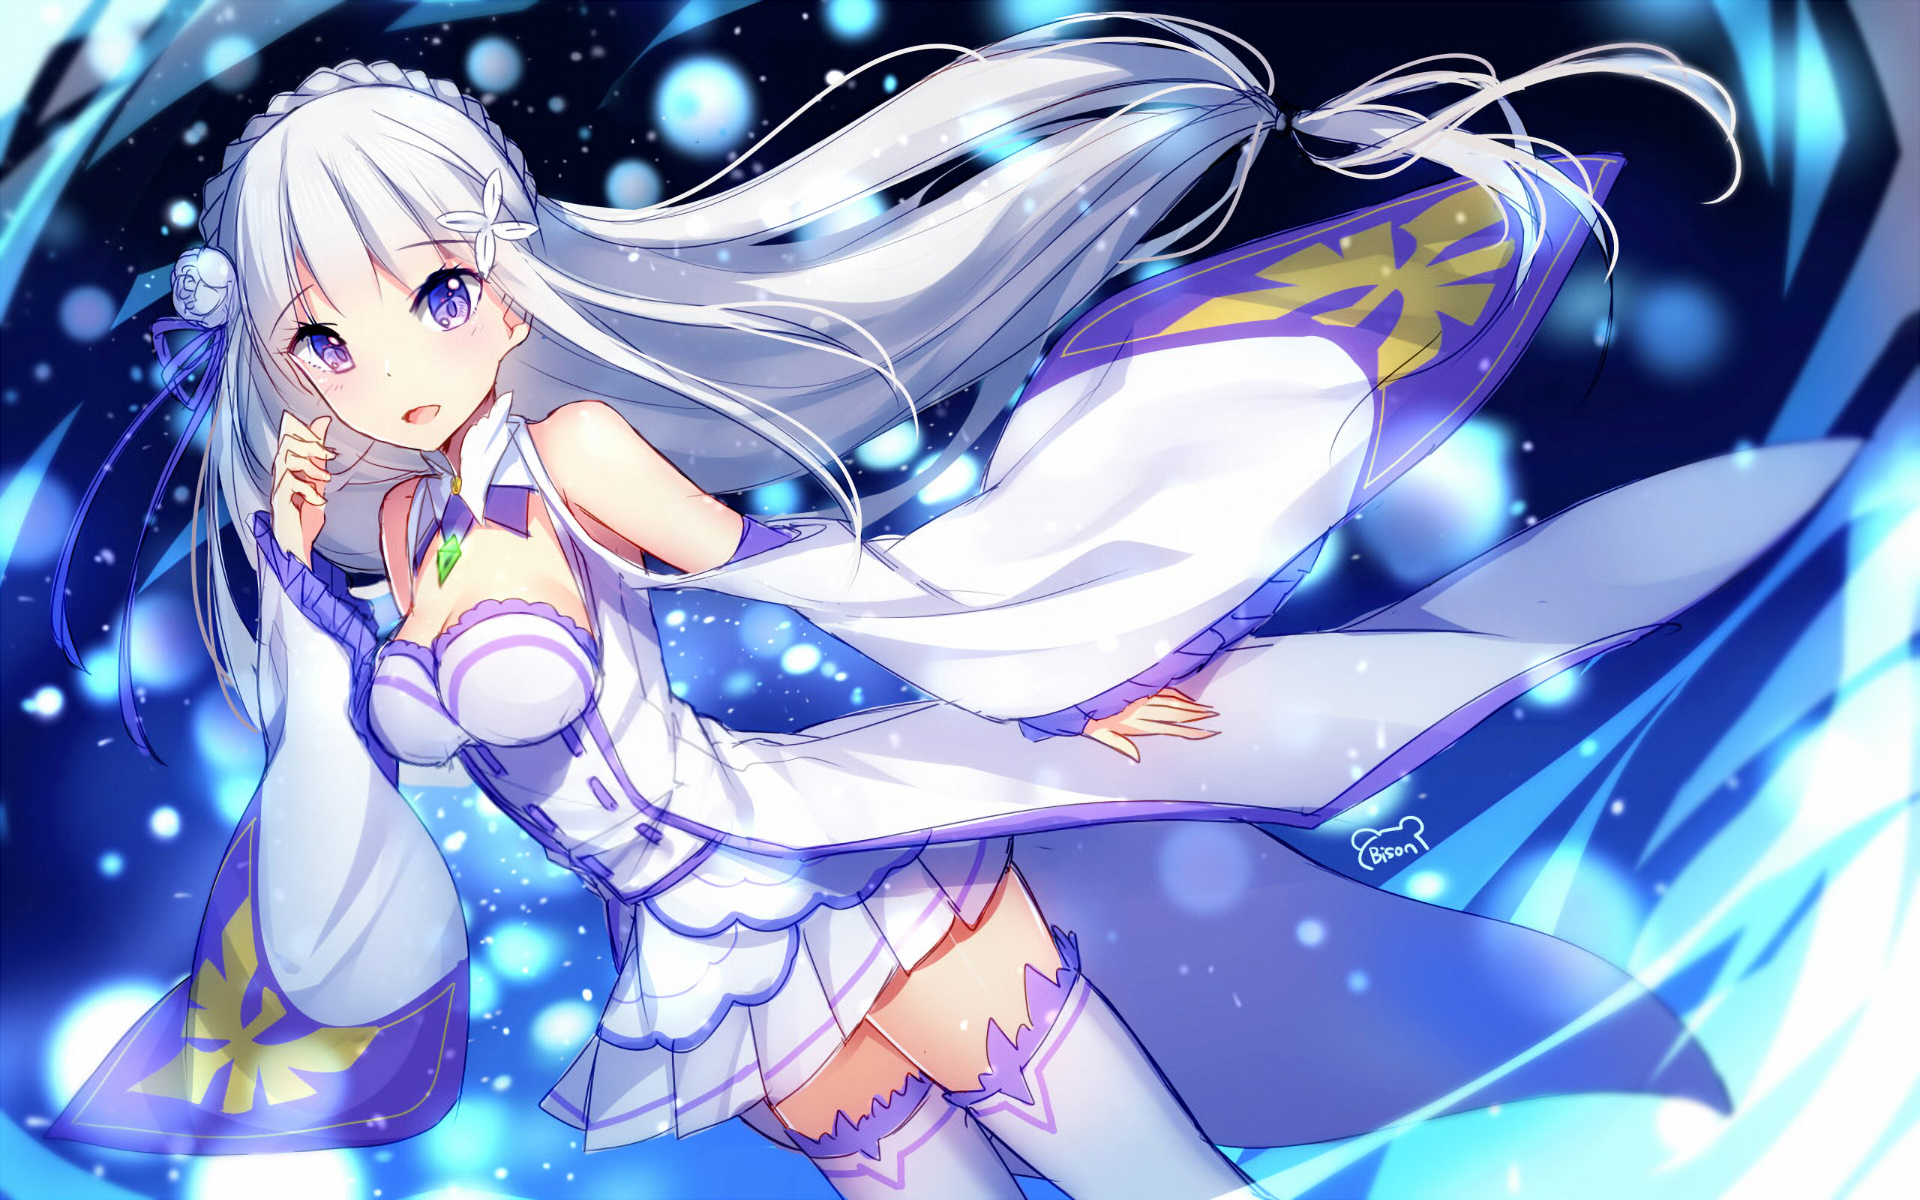 860+ Emilia (Re:ZERO) HD Wallpapers and Backgrounds